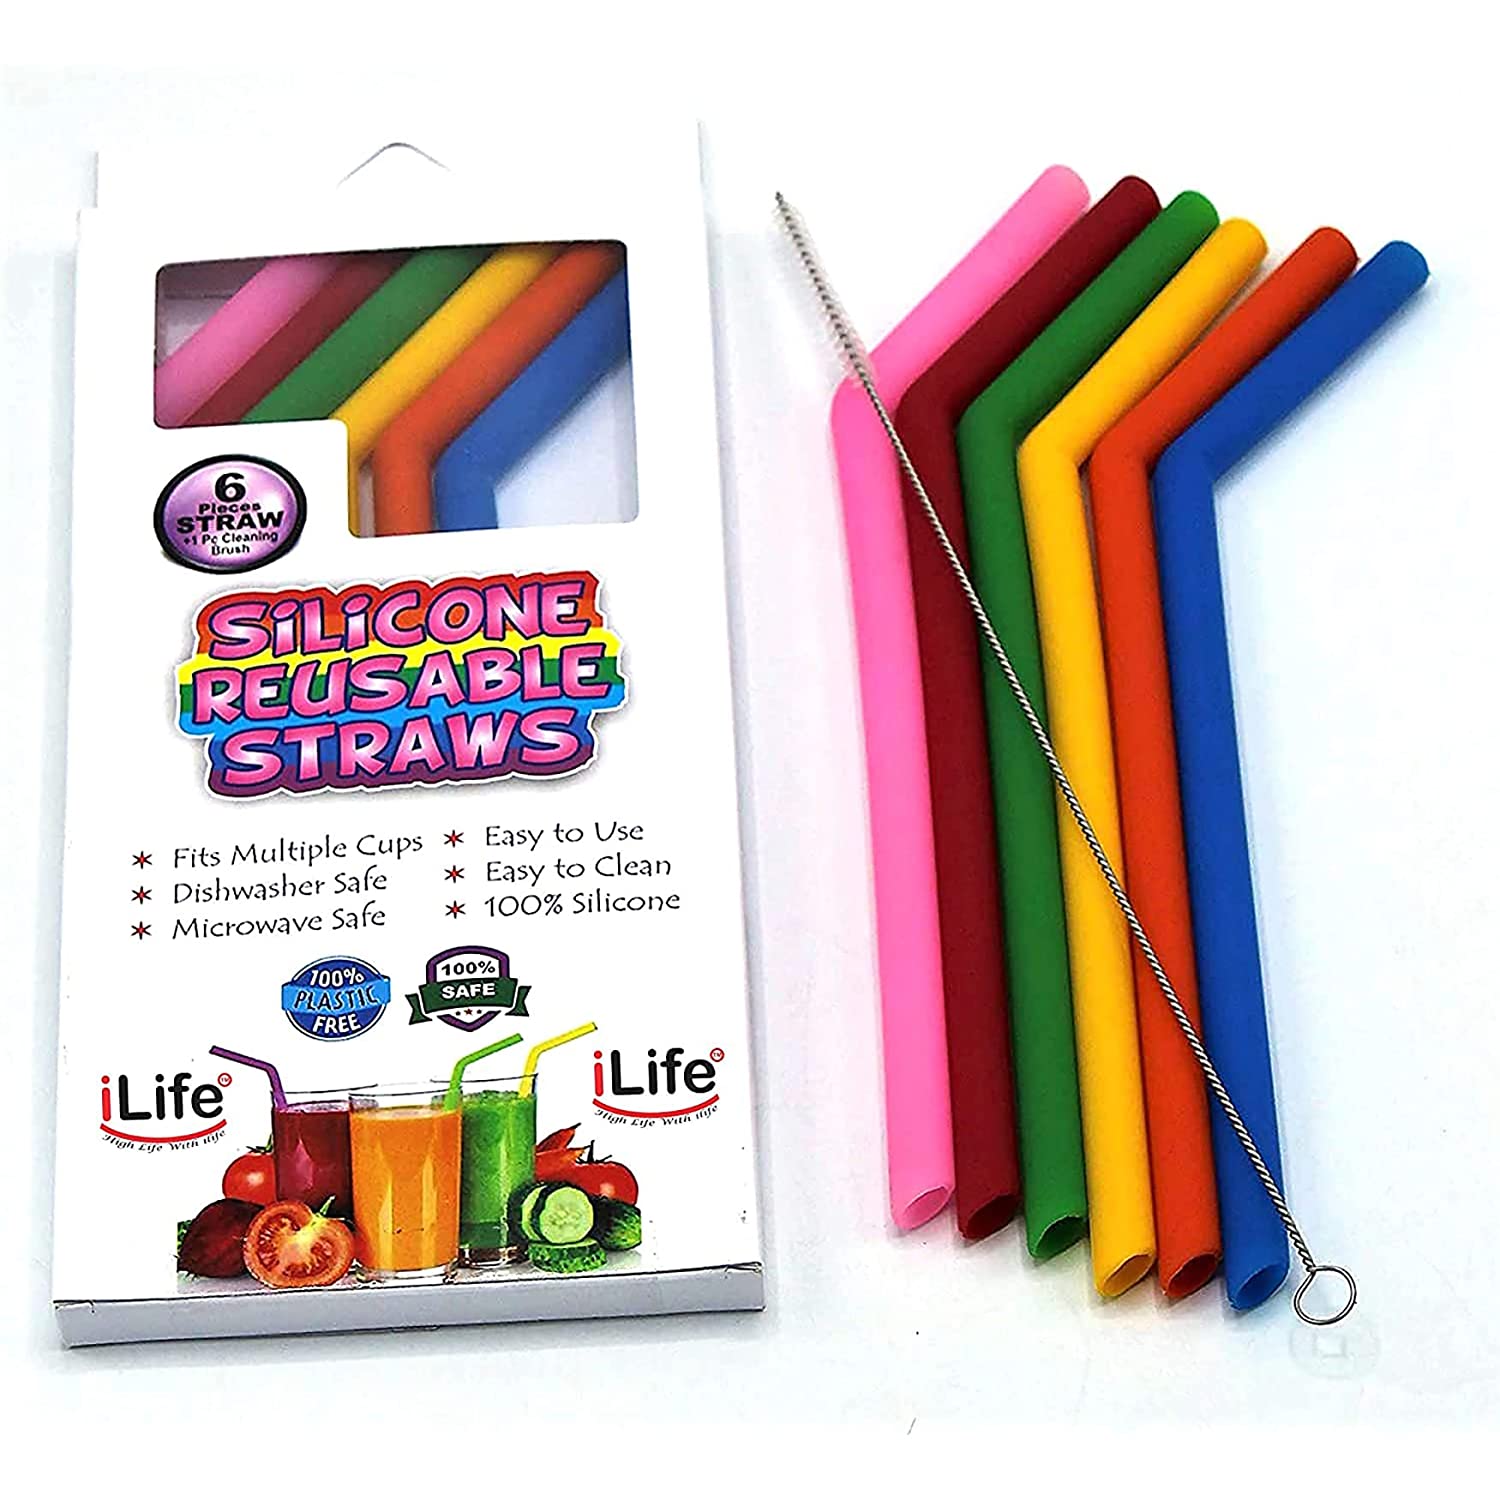 iLife Reusable Smoothie Straws Long Extra Wide Fat Silicone Straws for Drinking Bubble Tea, Milkshakes, Set of 6 with Cleaning Brush (Big)